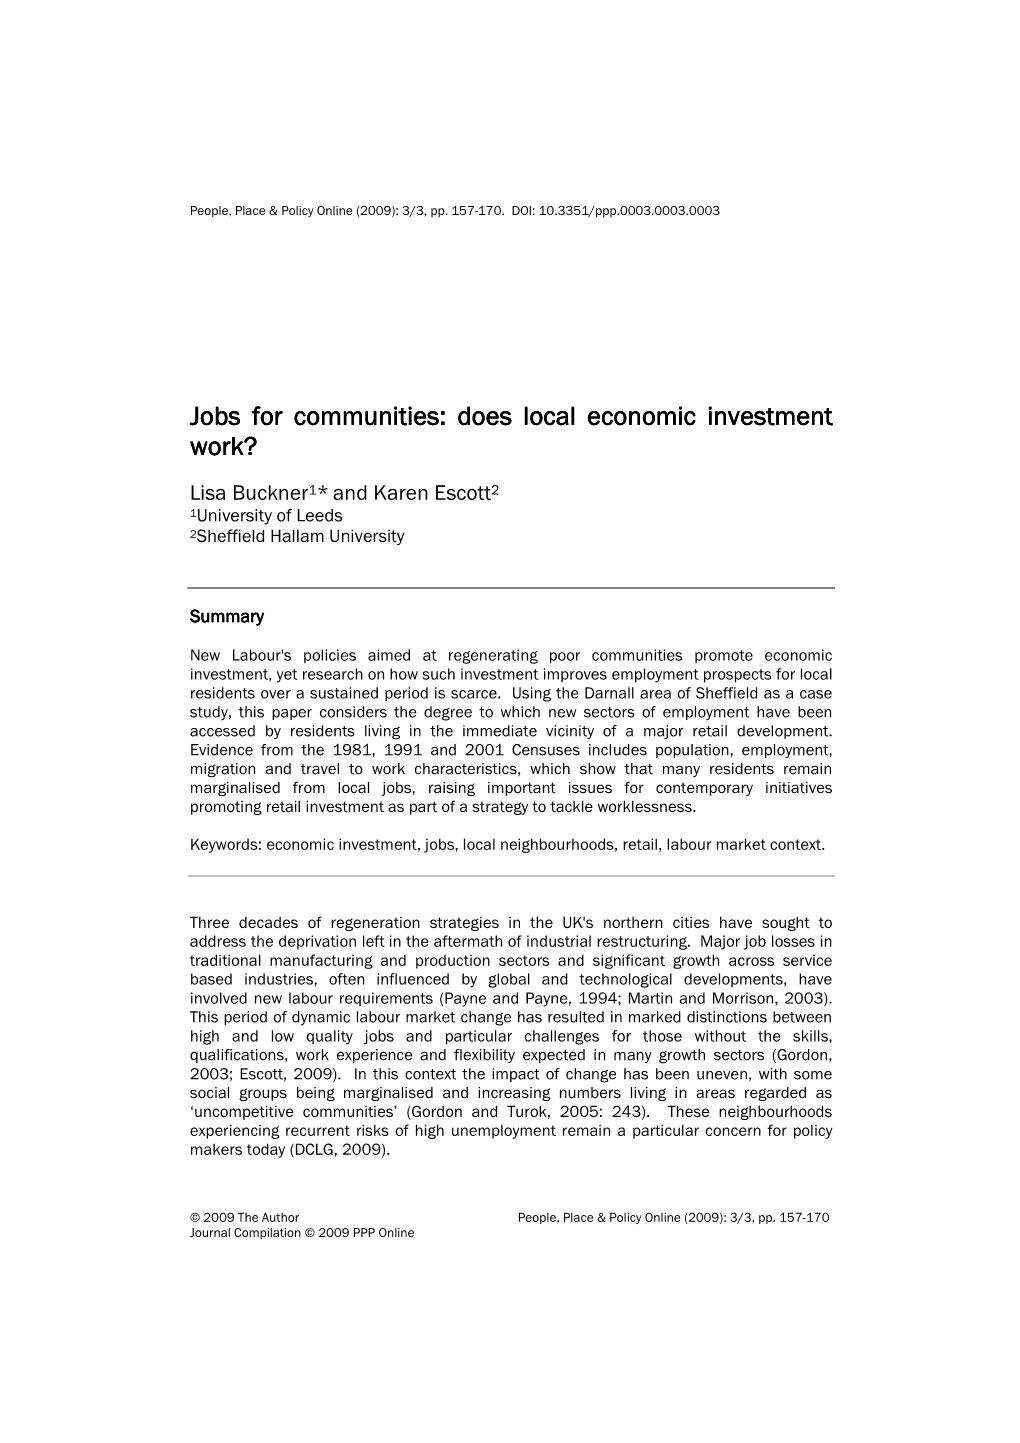 Does Communities: Does Local Economic Investment Investment